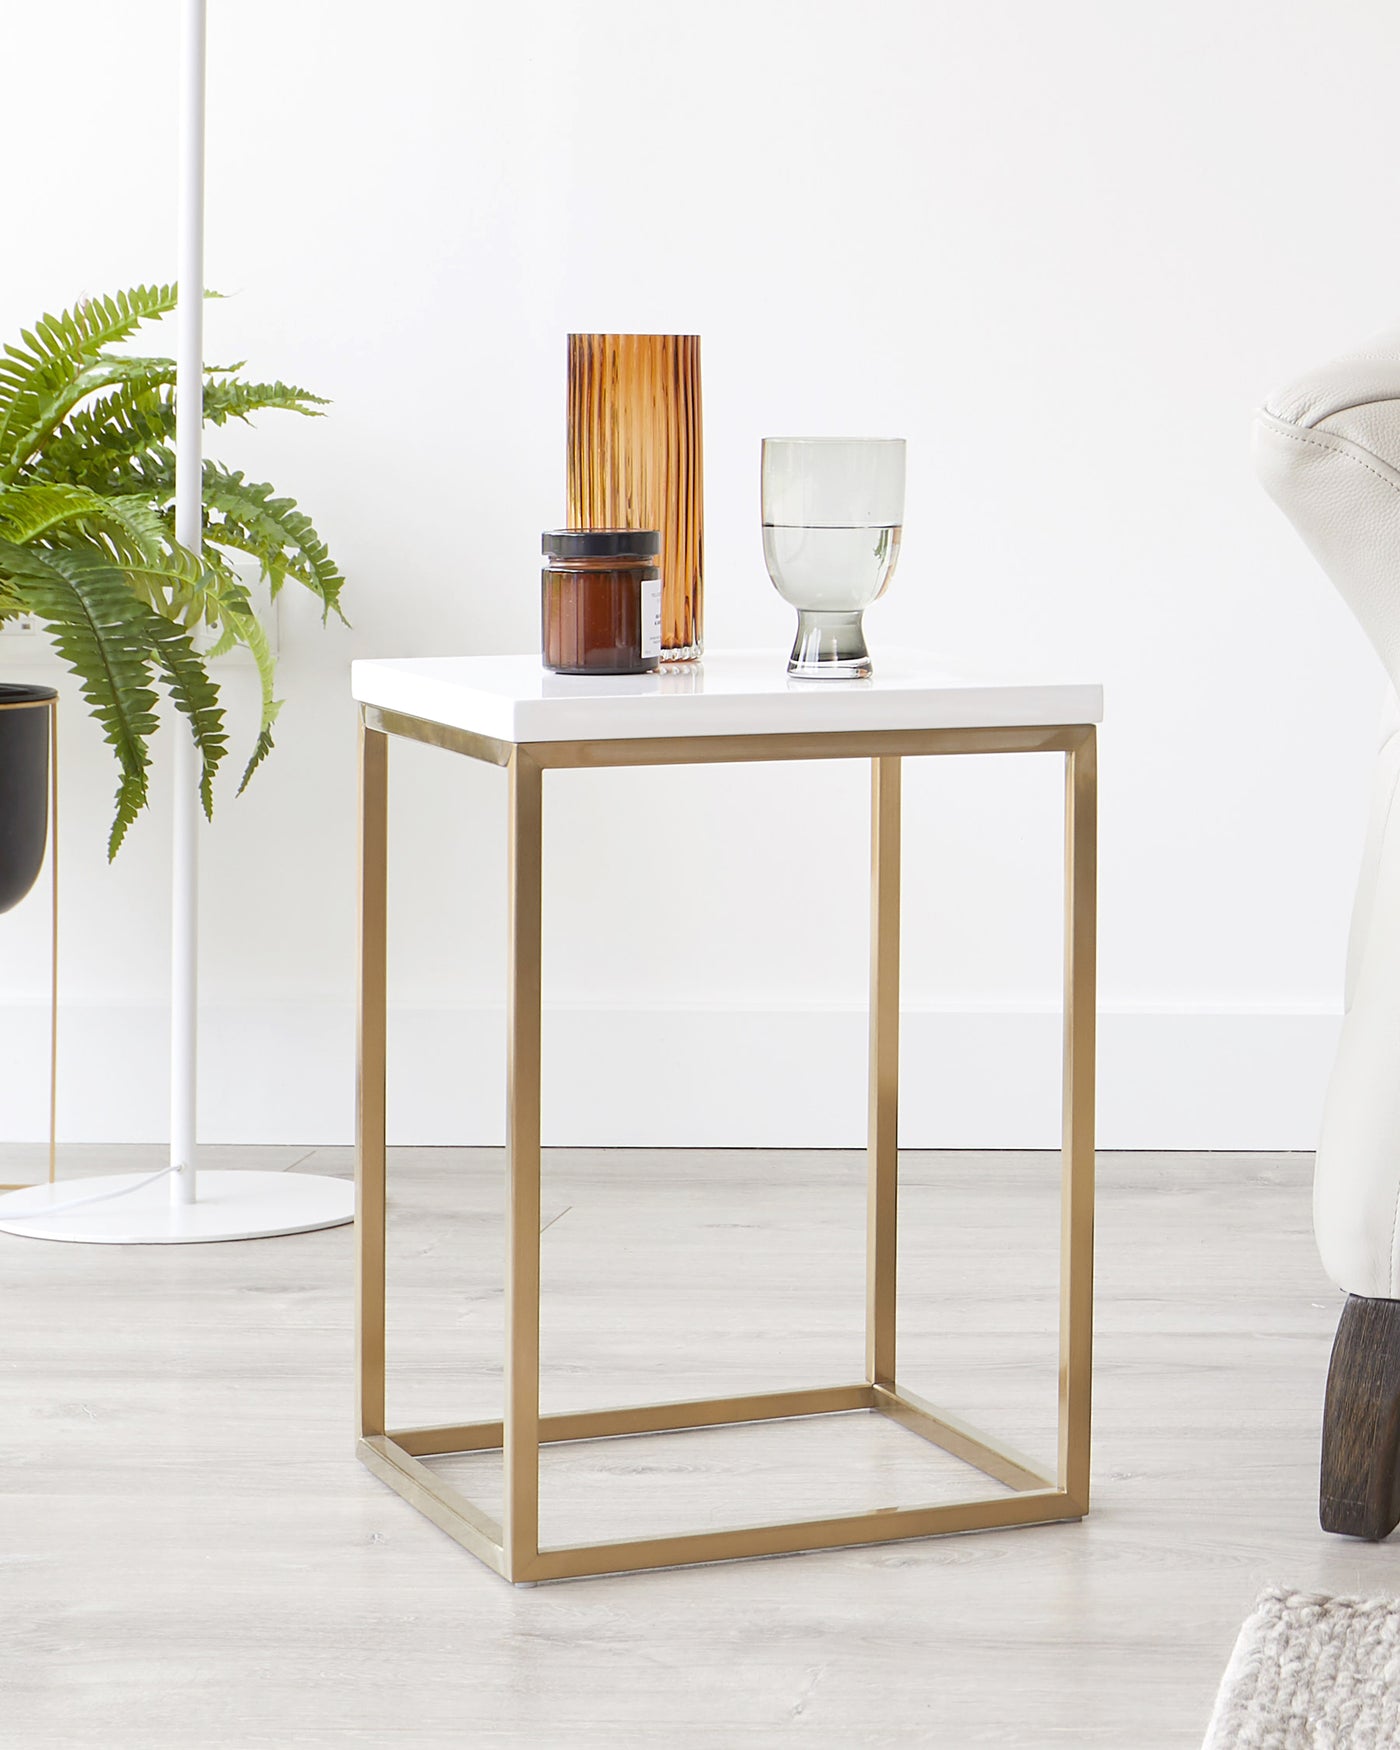 Modern minimalist side table with a white tabletop and a sleek gold metal frame, featuring decorative objects on top, set against a neutral interior backdrop.